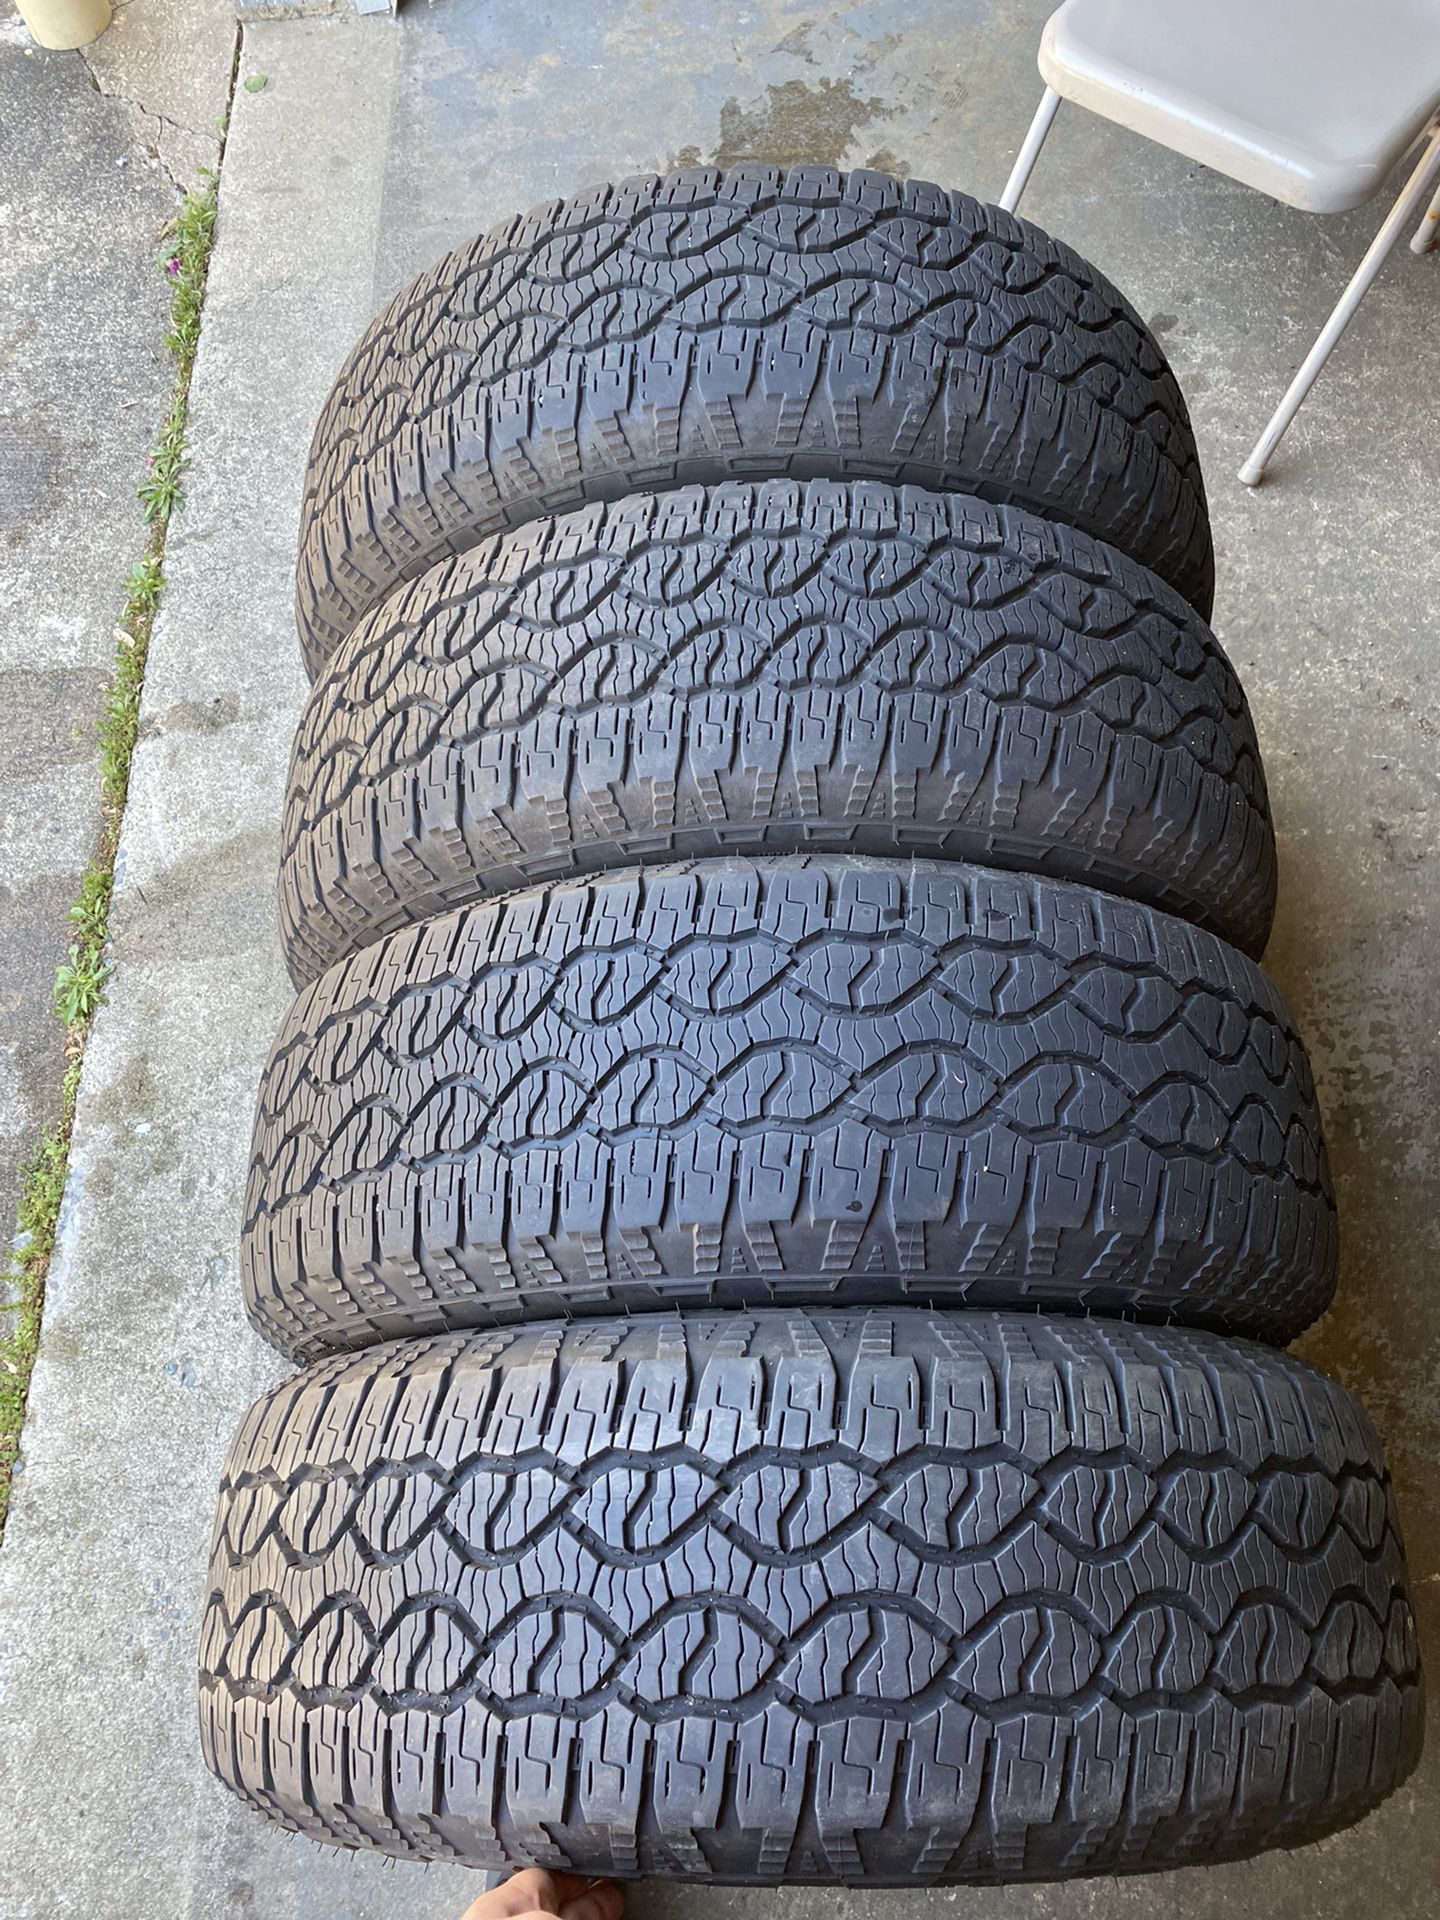 4) 275/65/18 Goodyear Wrangler Territory AT Tires. Tread measures 10-12/32  DOT 2320 $525 for 4 I carry other sizes for Sale in Woodlyn, PA - OfferUp